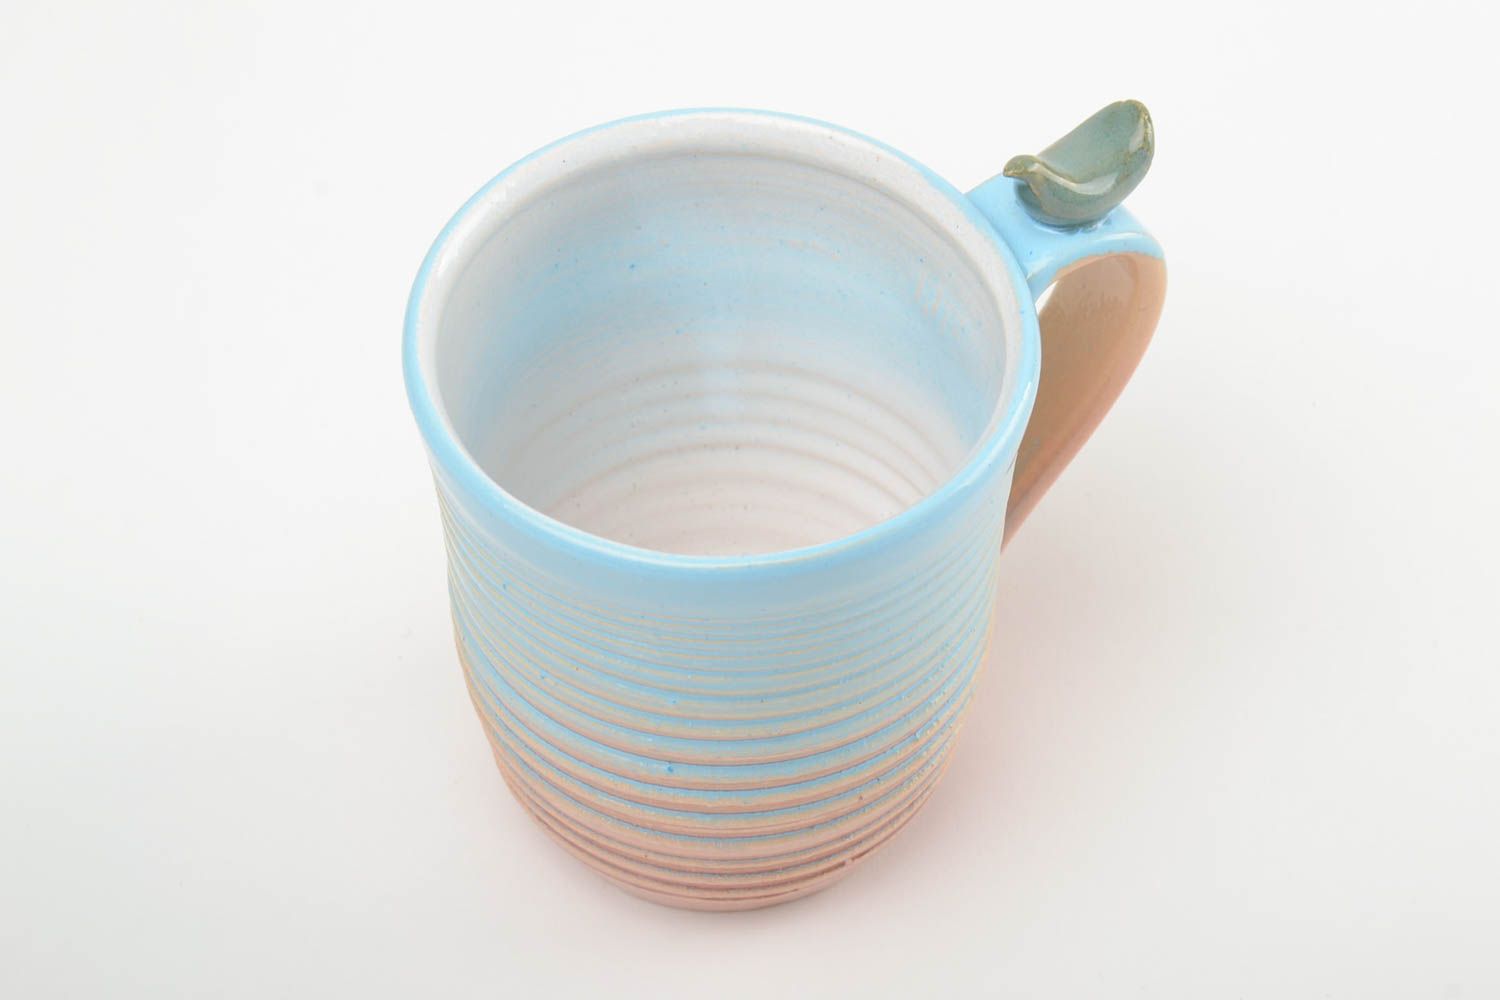 10 oz porcelain handmade drinking cup in blue, white, and beige colors with handle photo 4